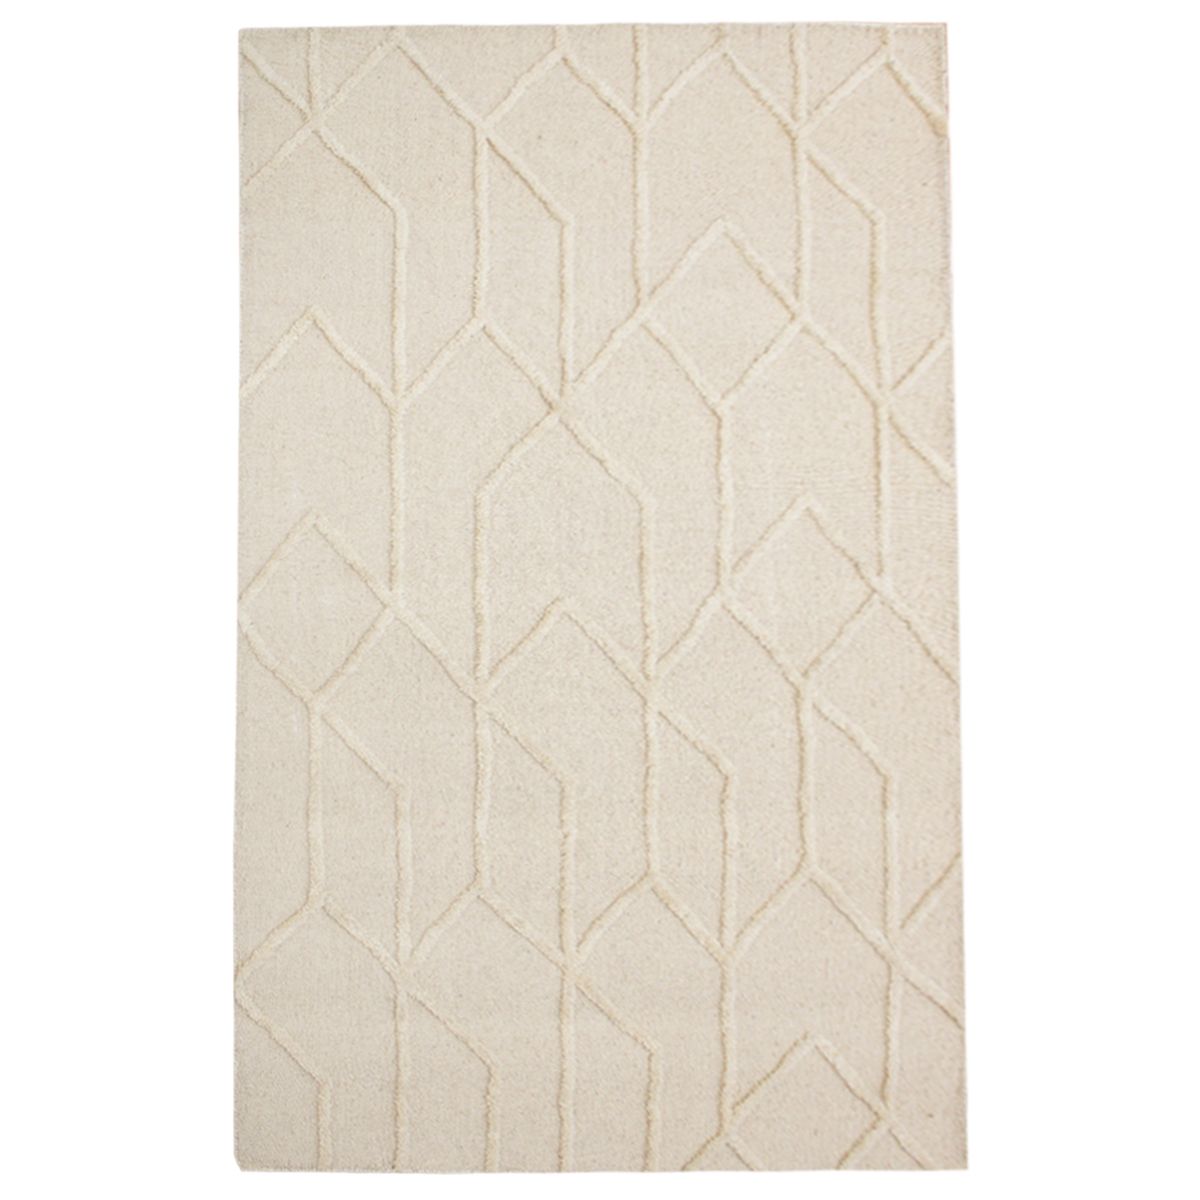 Ivory 'Dina' Textured Over Tufted Wool Modern Rug